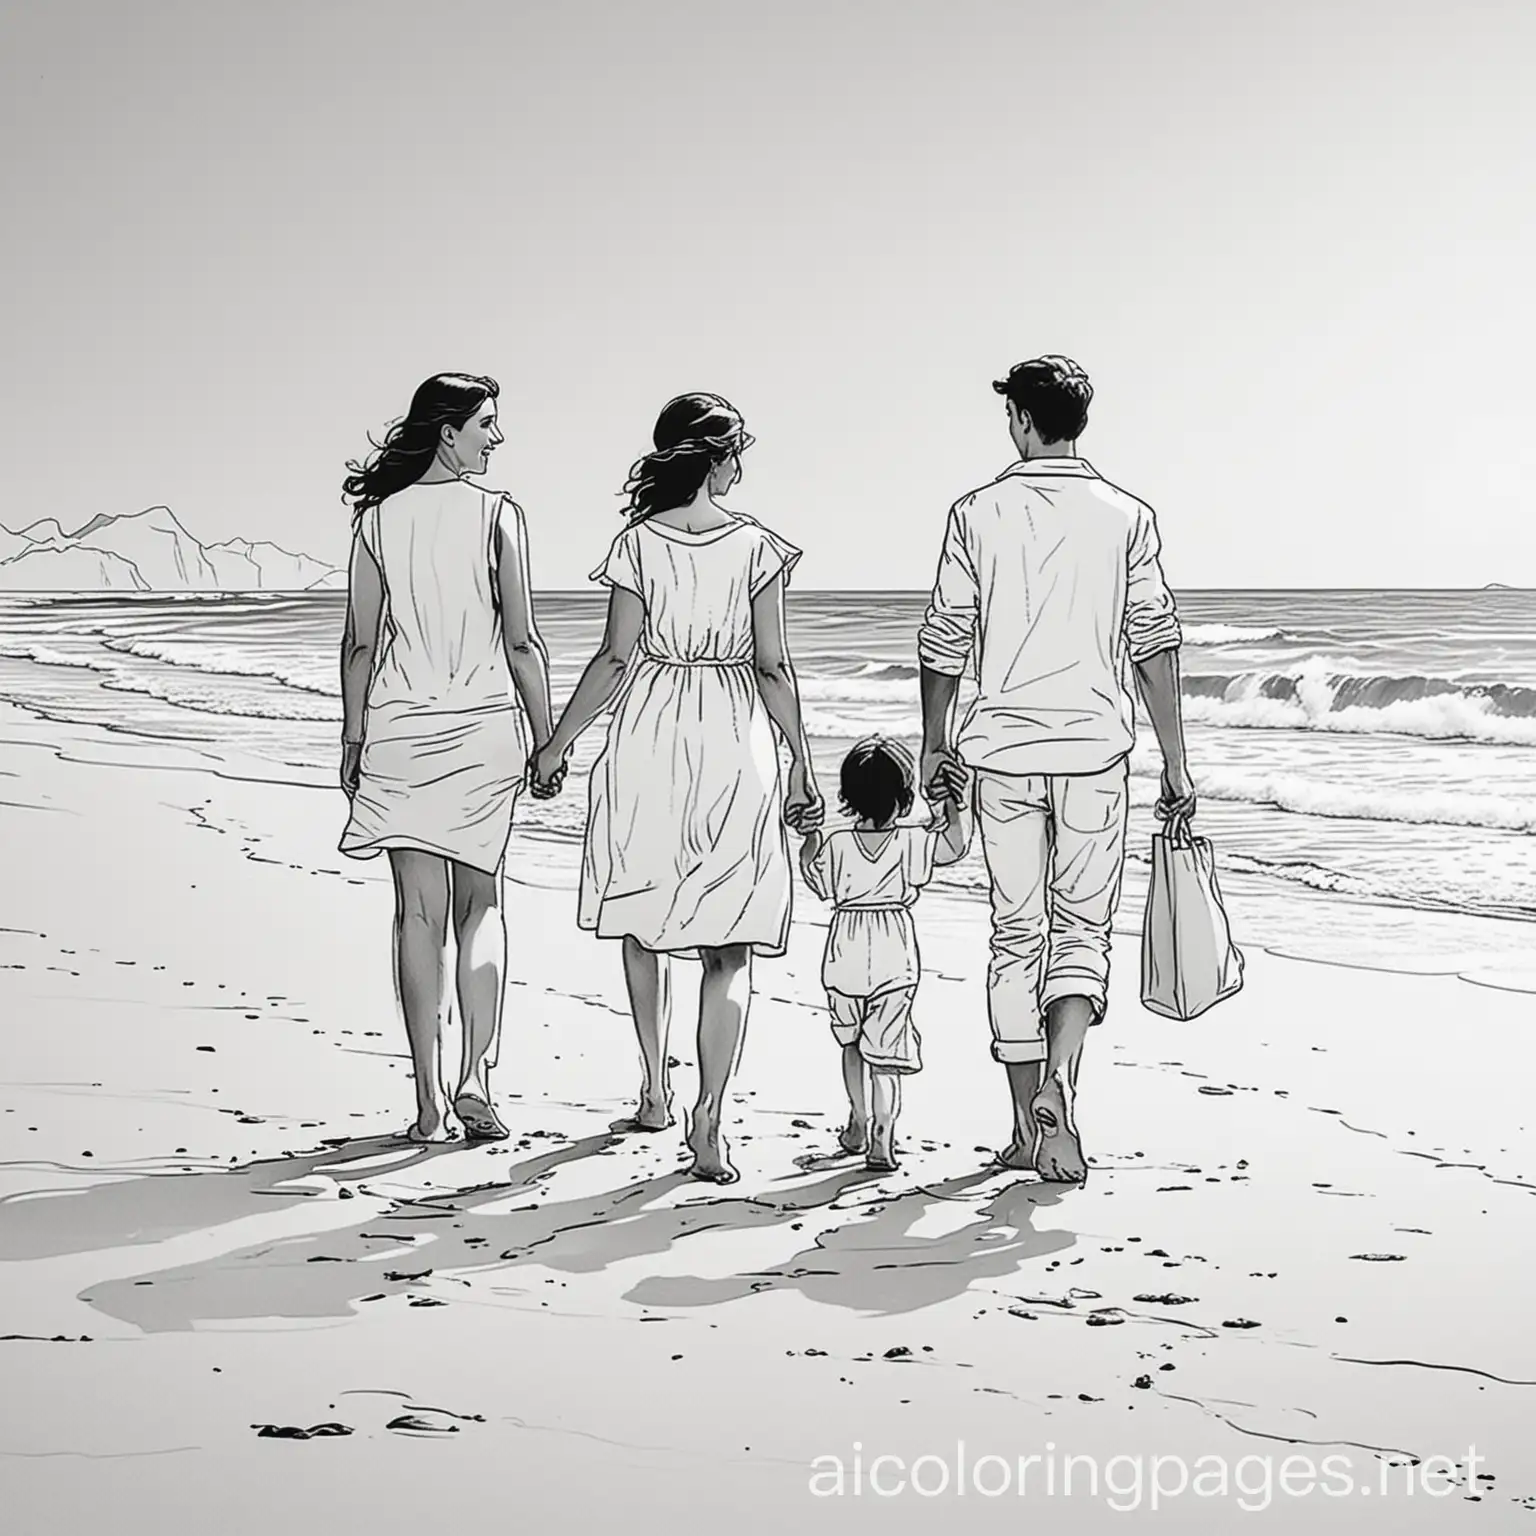 familia paseando por la playa,nColoring Page, black and white, line art, white background, Simplicity, Ample White Space.nThe background of the coloring page is plain white to make it easy for young children to color within the lines. The outlines of all the subjects are easy to distinguish, making it simple for kids to color without too much difficulty